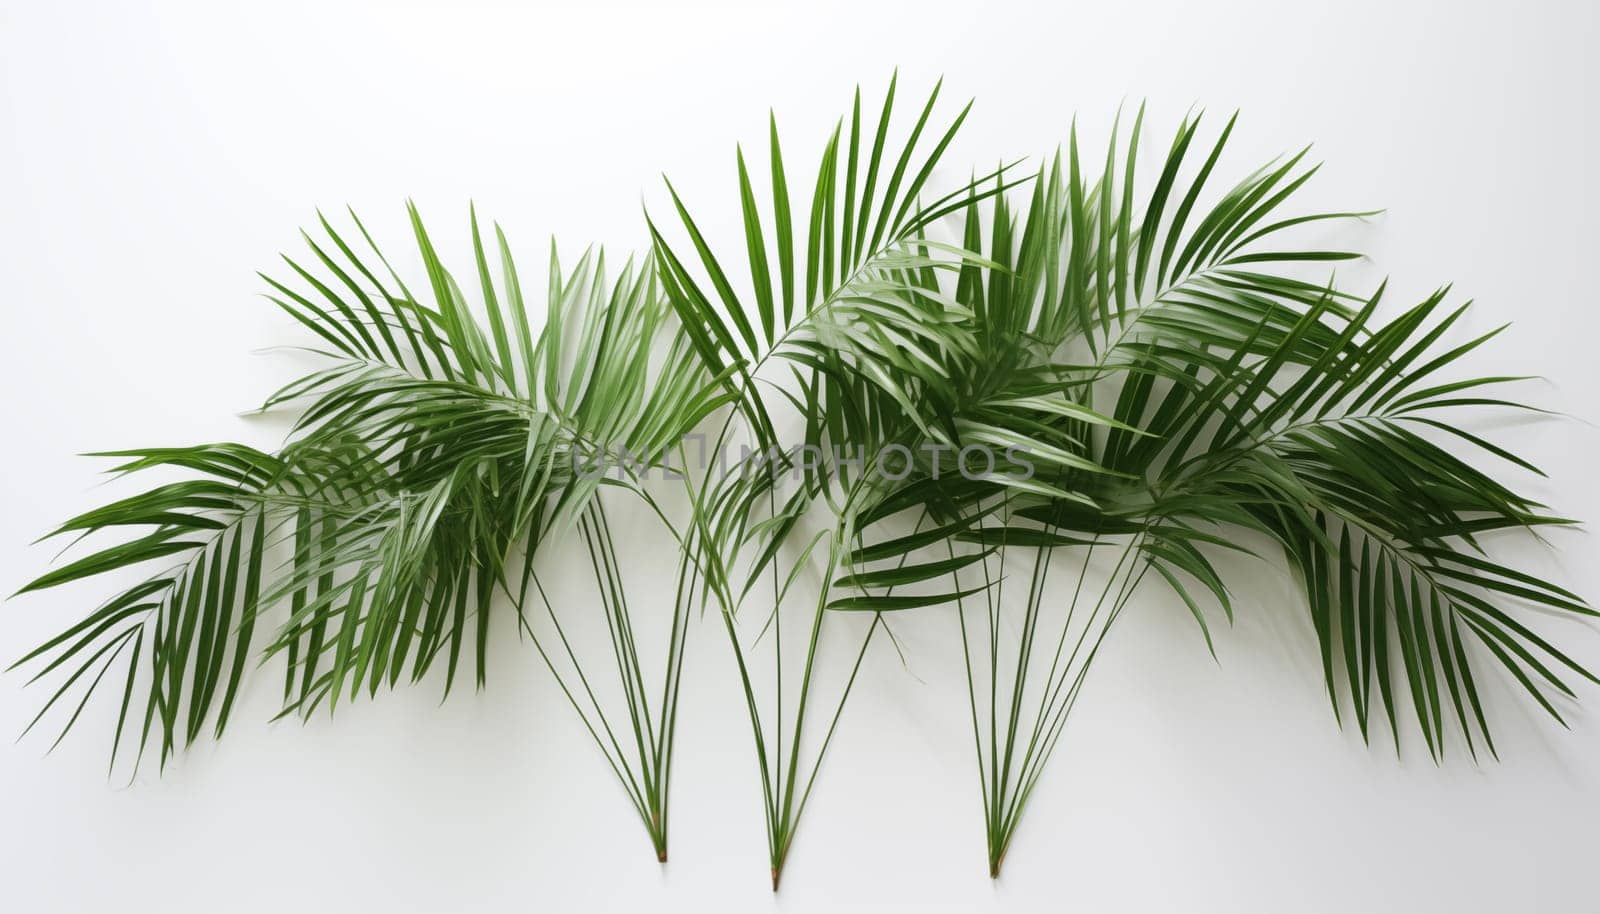 Bamboo Palm leaves on white background, isolated. High quality photo